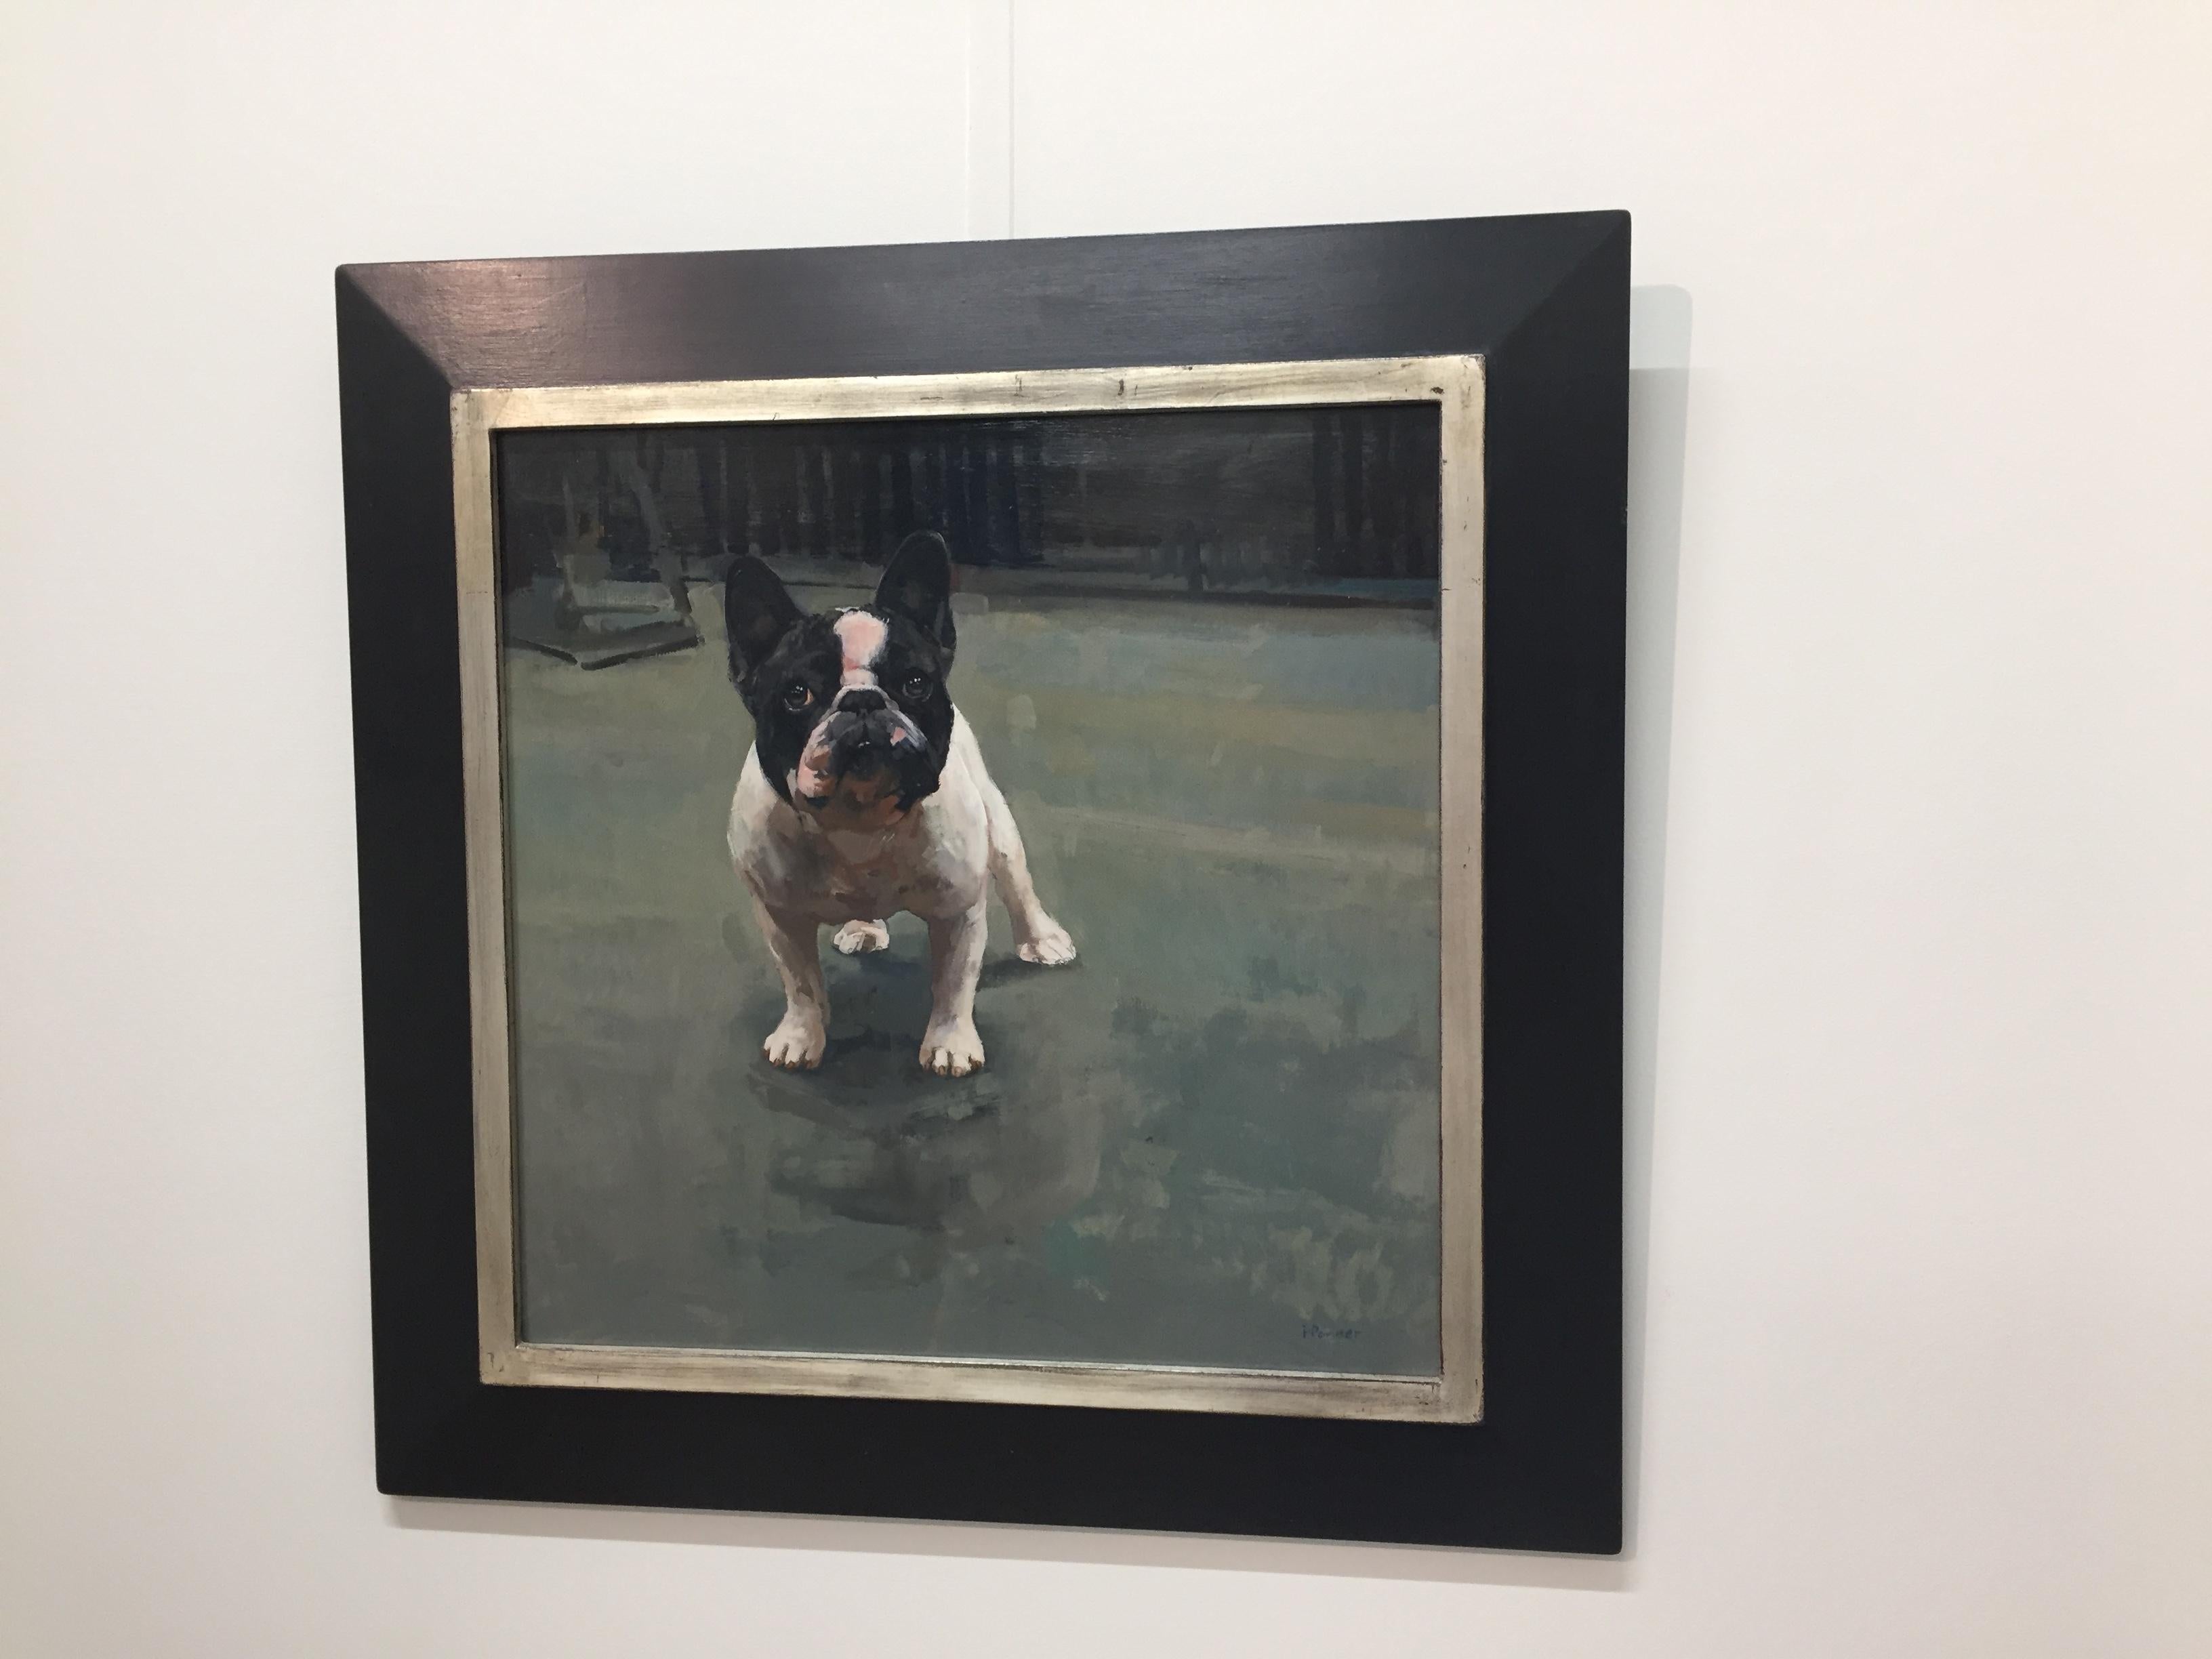 This painting by Pieter Pander is typical for his oeuvre. He works in the figurative tradition, but his test, unlike many of his colleagues, is smooth and sketchy. Only parts of the performance are elaborated, so that they become more explicit. The